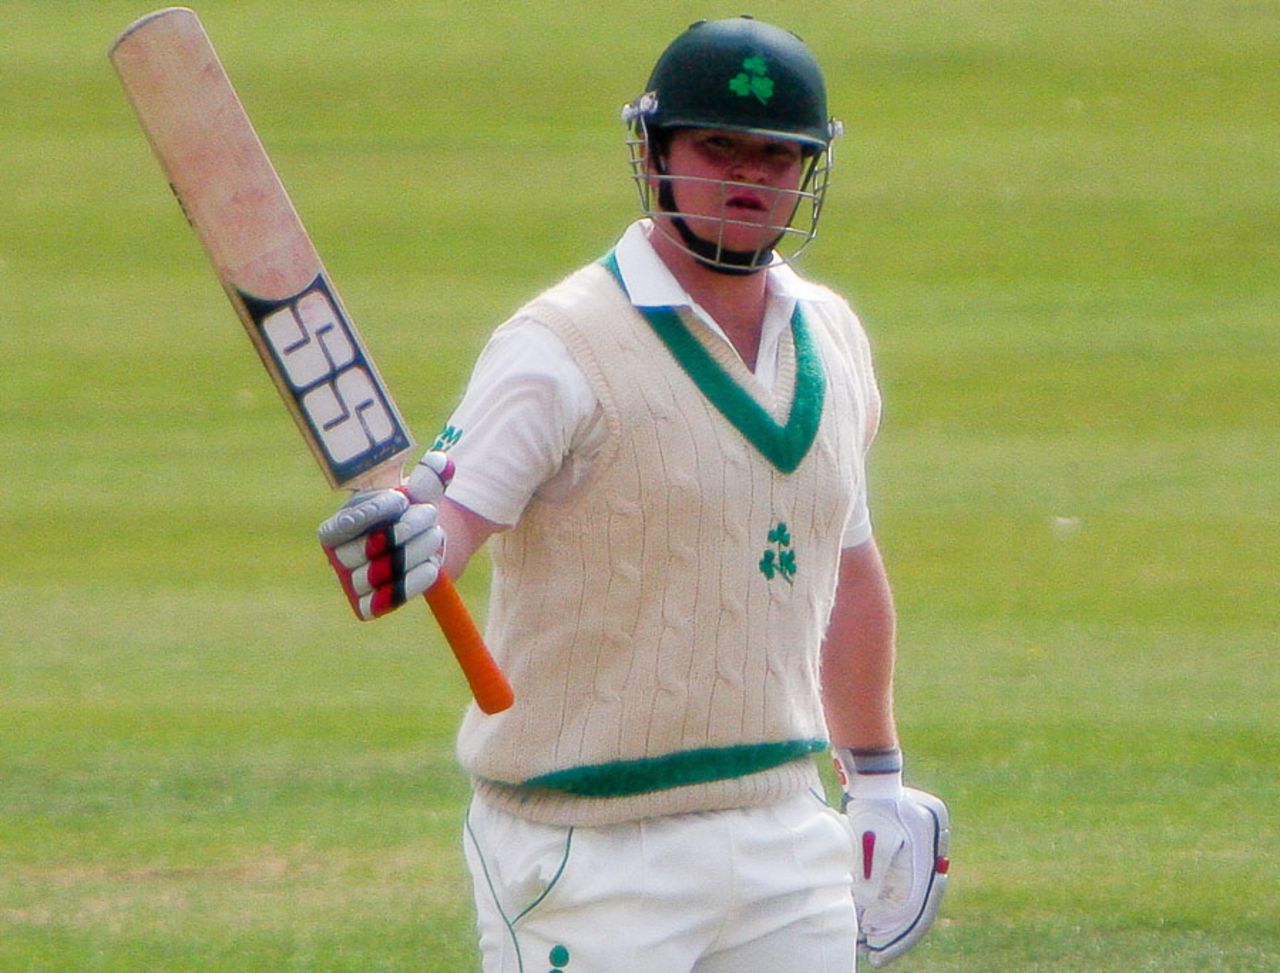 Paul Stirling put Ireland in charge with a century, Ireland v Canada, Intercontinental Cup, 1st day, Dublin, September 13, 2011